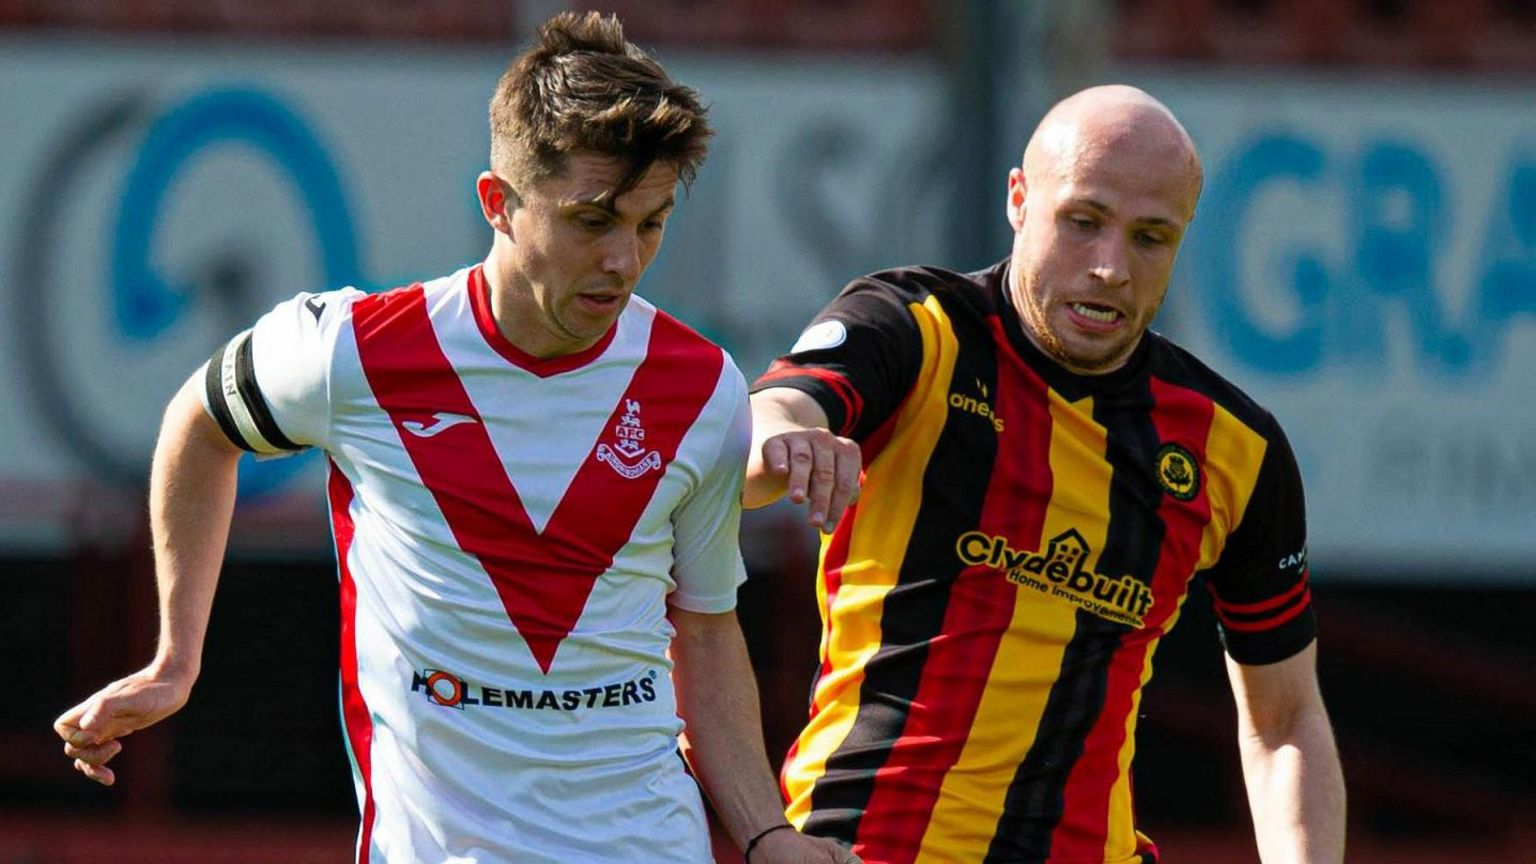 Airdrieonians' Charlie Telfer and Partick Thistle's Kerr McInroy